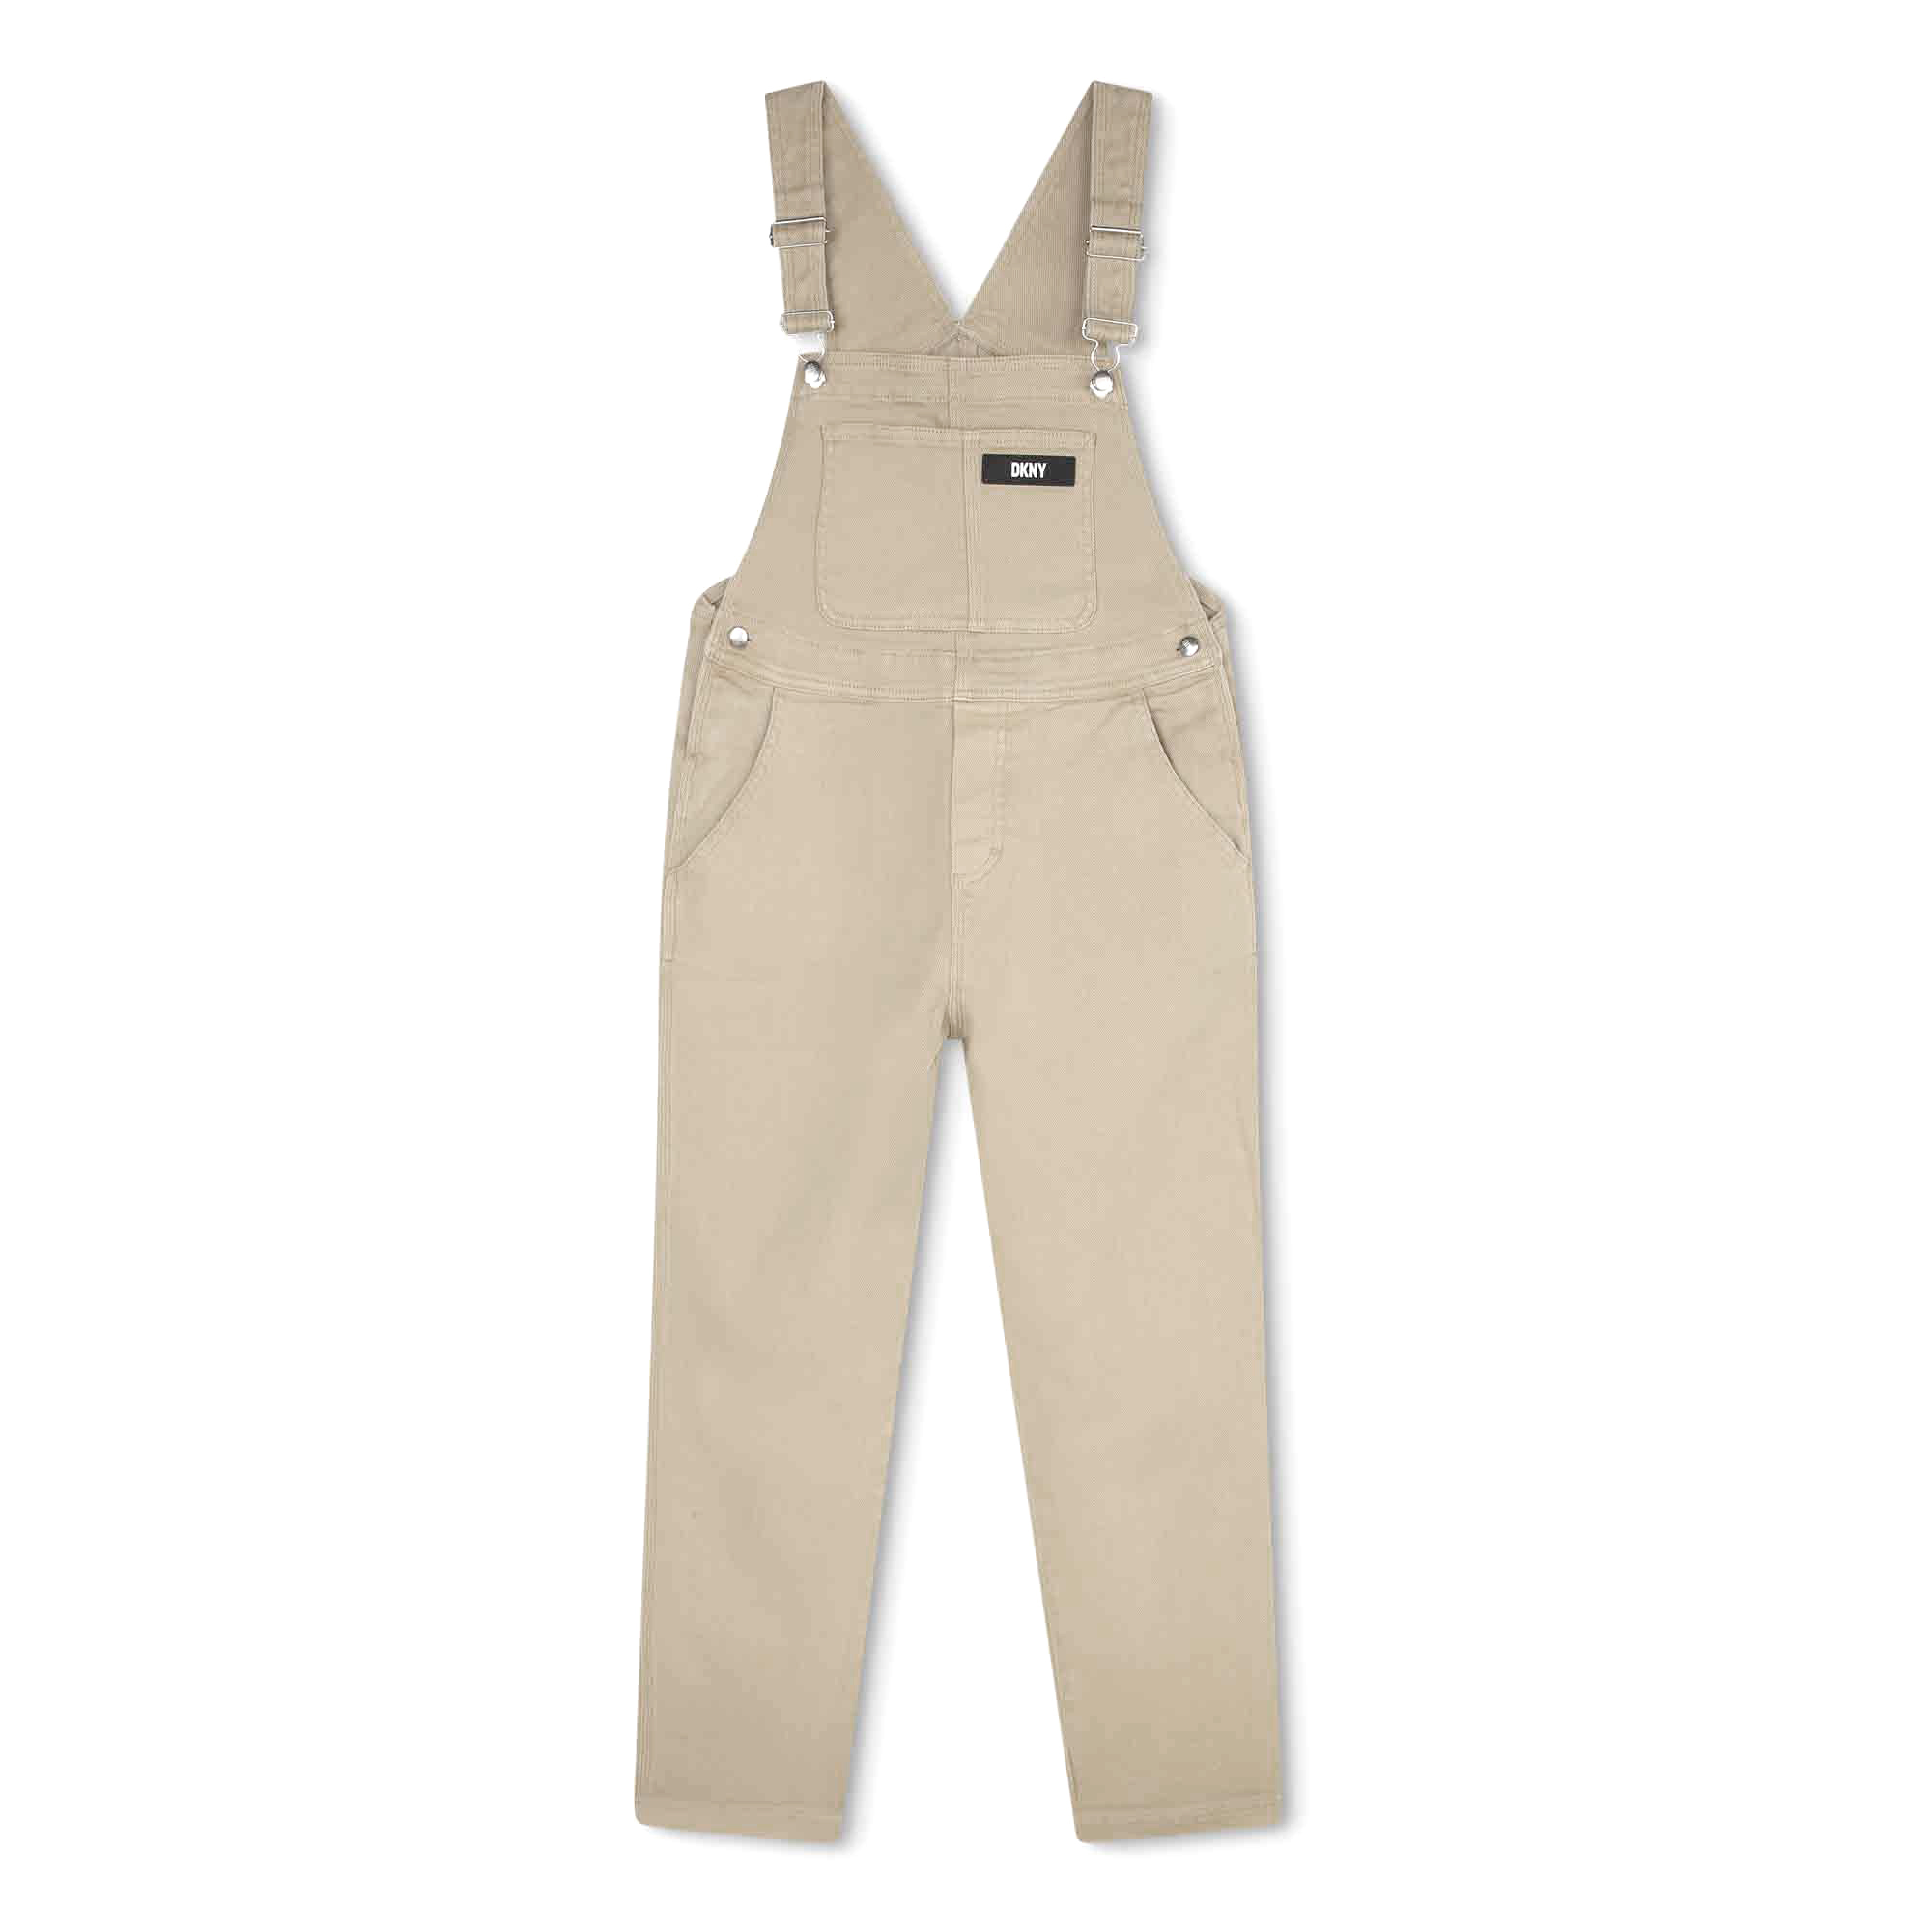 Dyed cotton overalls DKNY for UNISEX